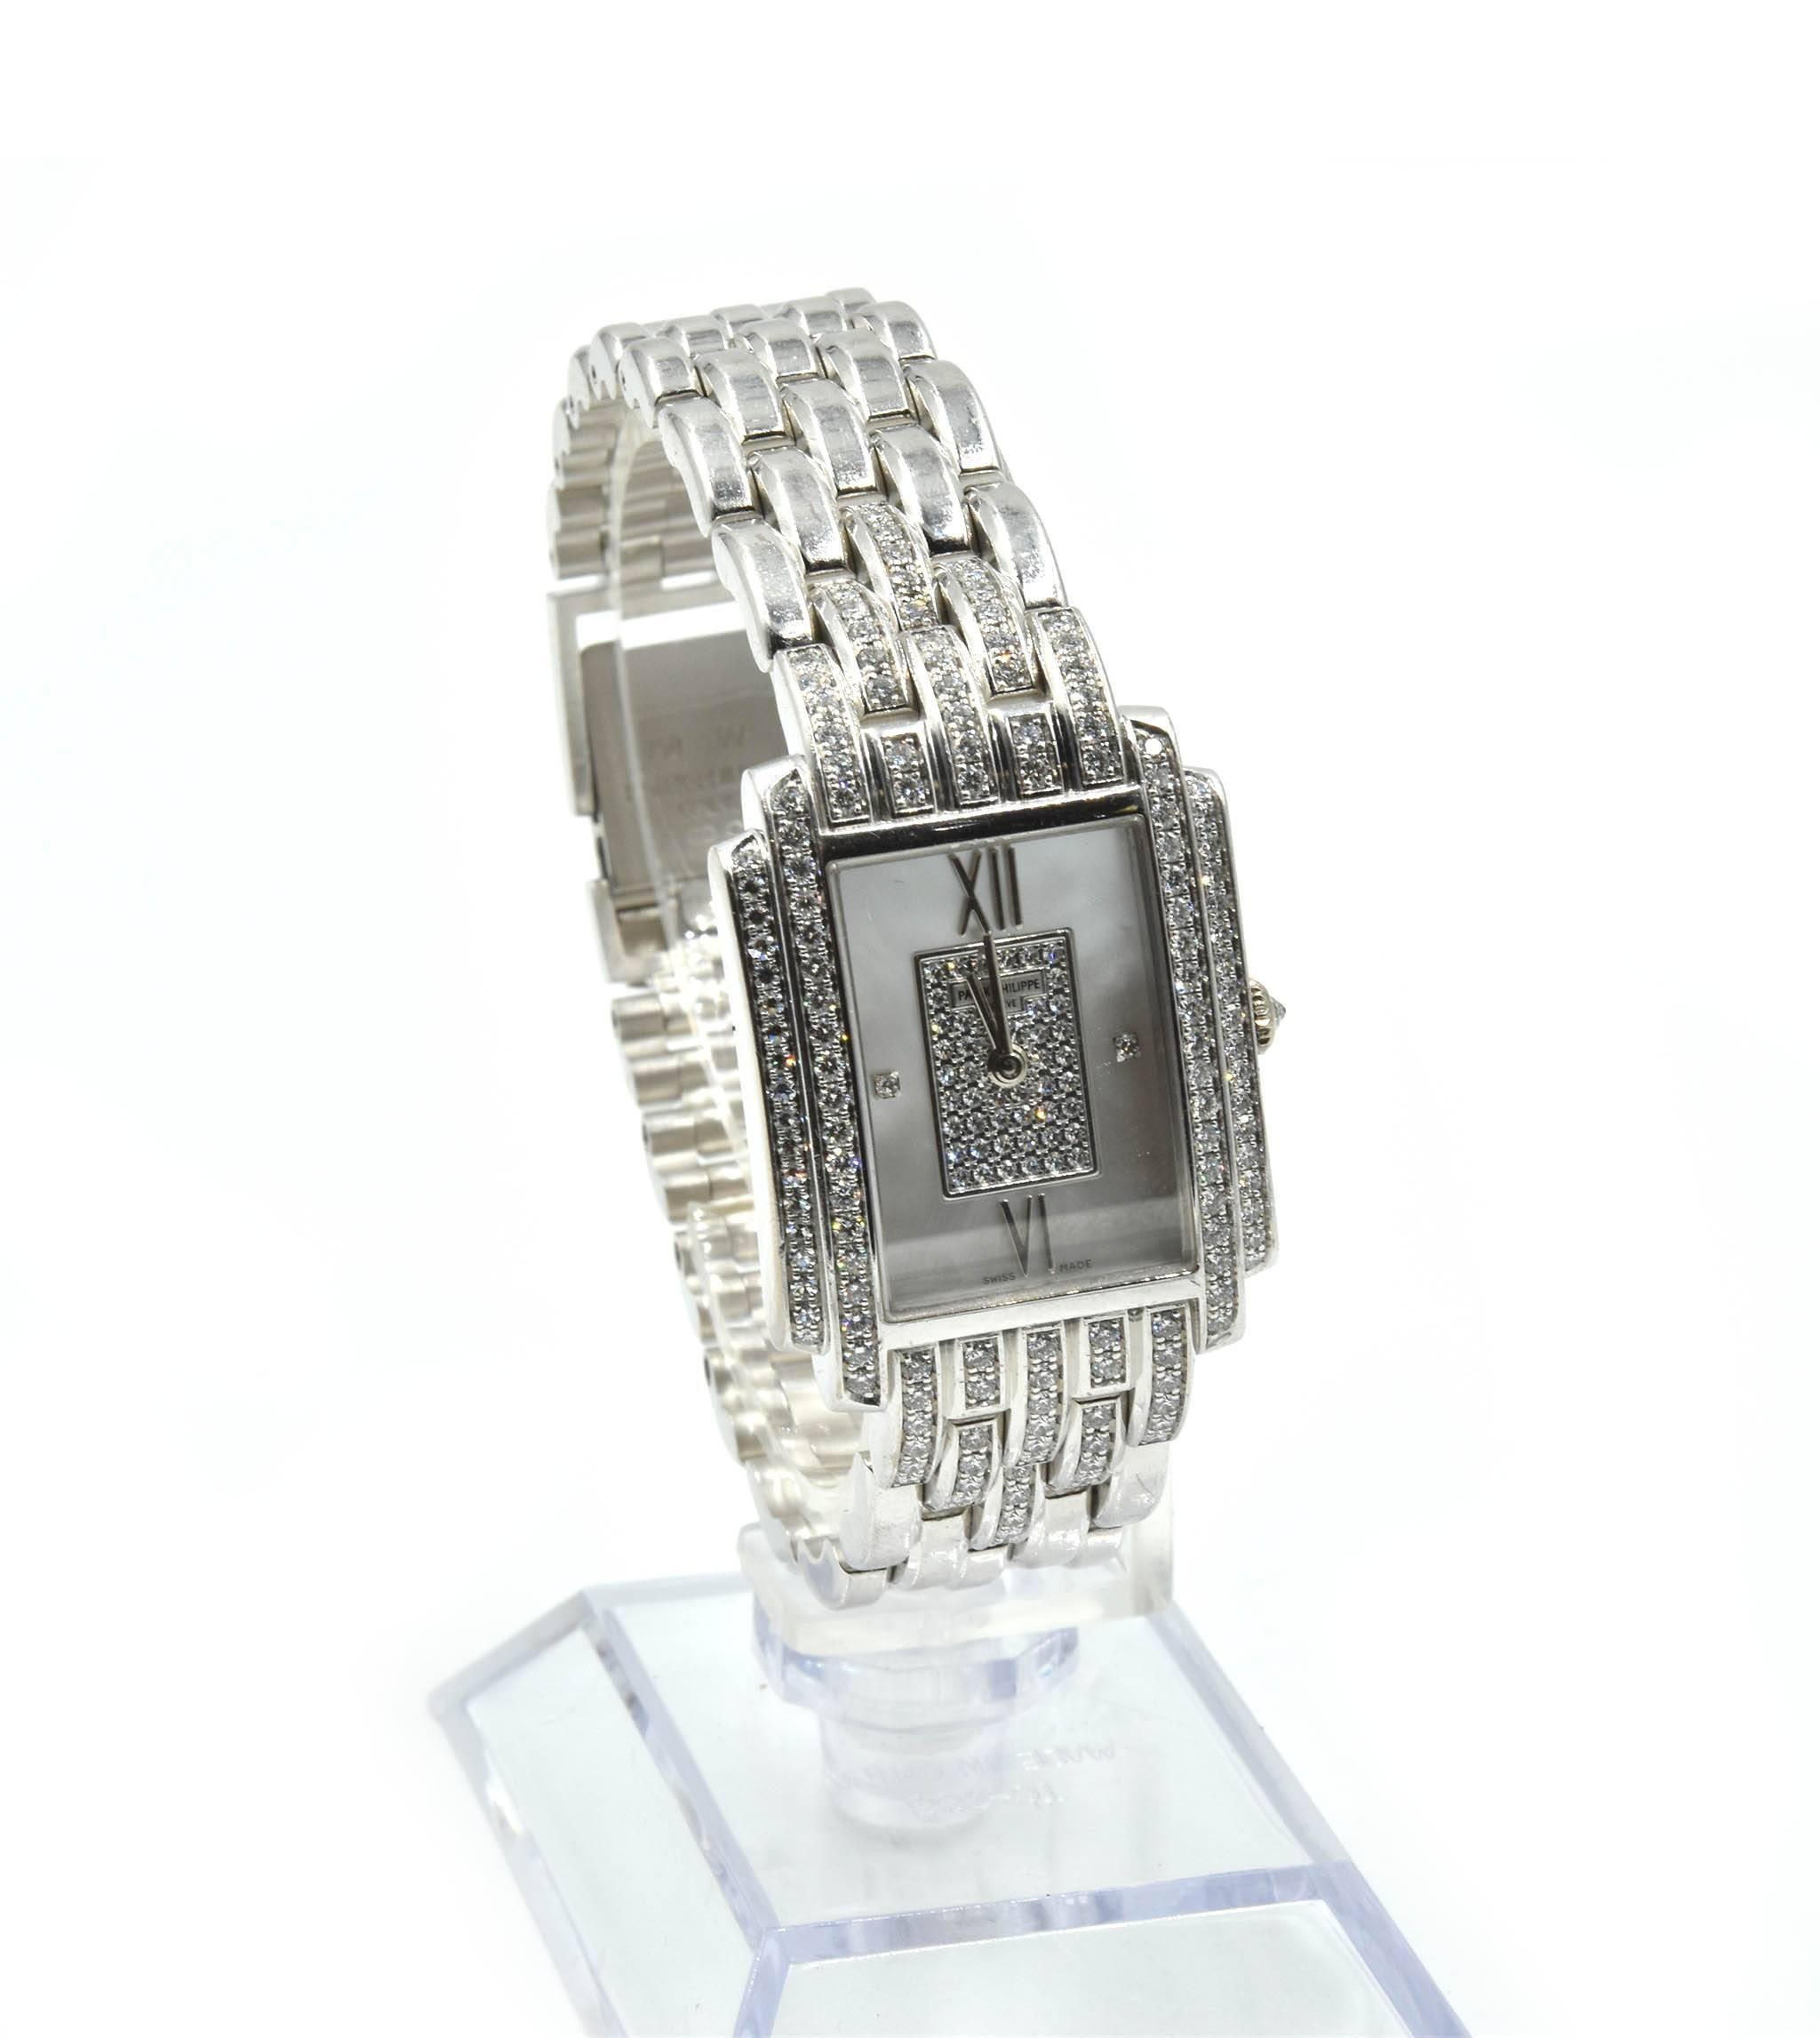 Movement: quartz
Function: hours, minutes
Case: rectangular 23mm x 22mm 18k white gold diamond case, 6mm case thickness, sapphire protective crystal, pull/push crown, water resistant to 30 meters
Band: 18k white gold bracelet set with factory